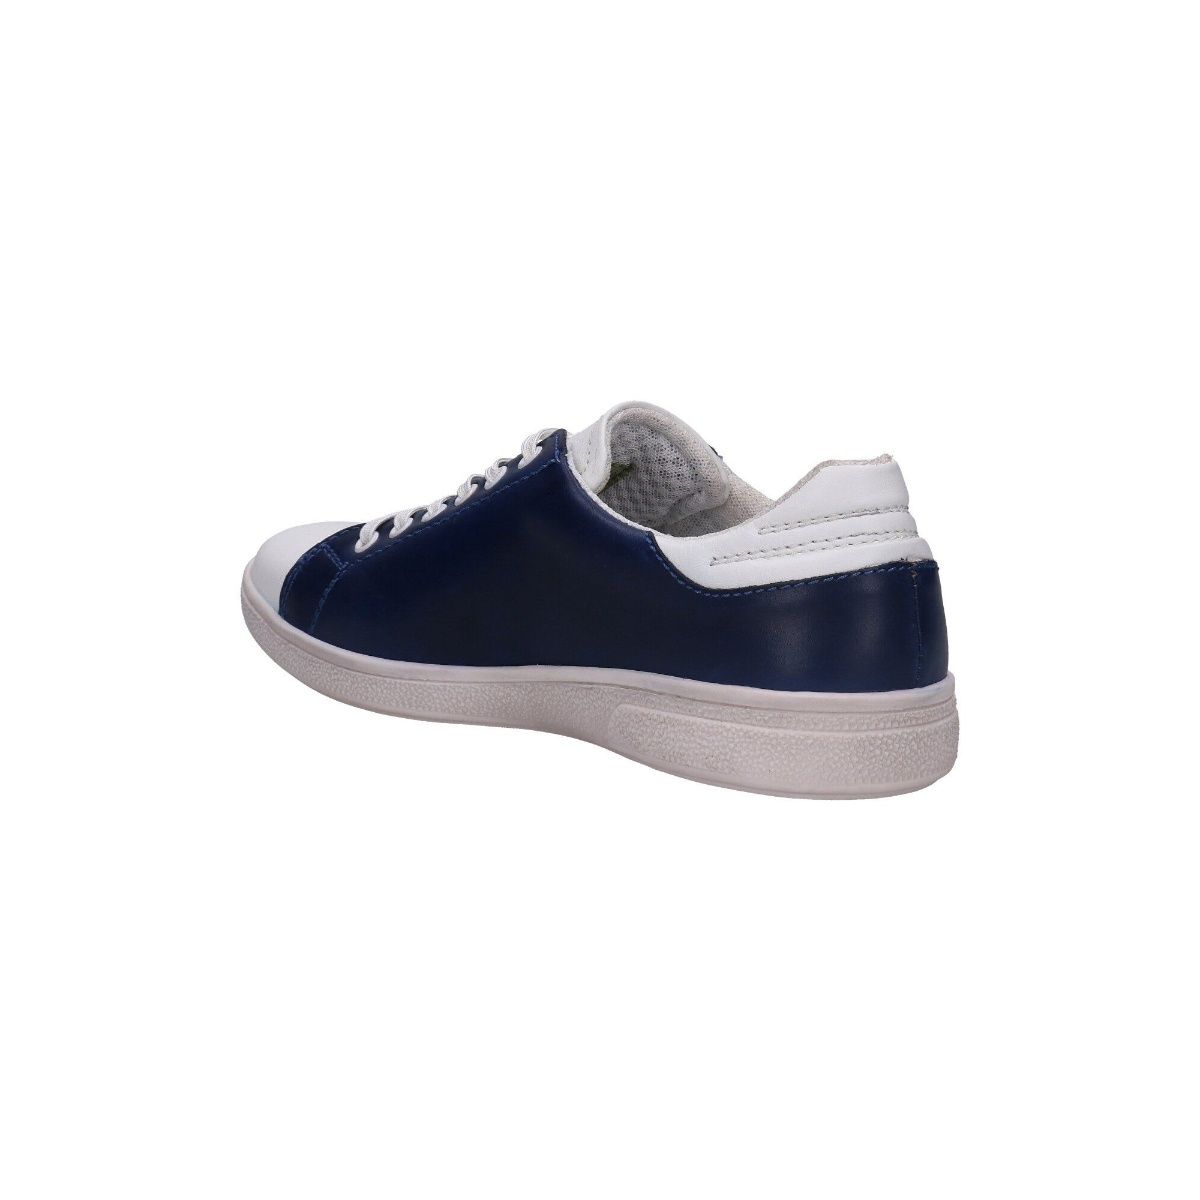 High Fashion Blue Canvas Solid Sneakers For Men